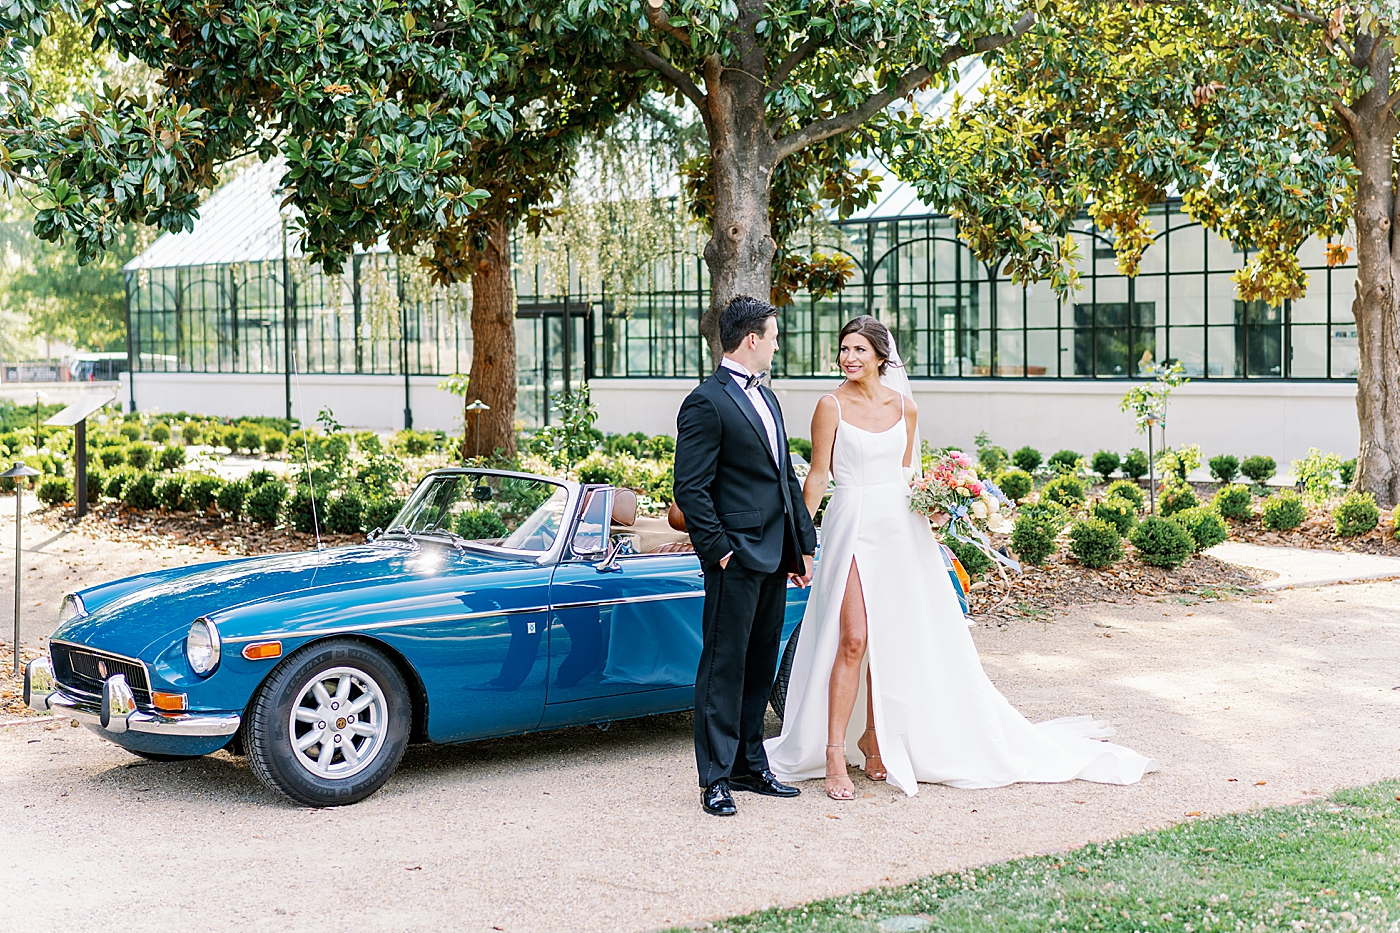 Bride and groom posing by blue antique car | Photo by Annie Laura Photo